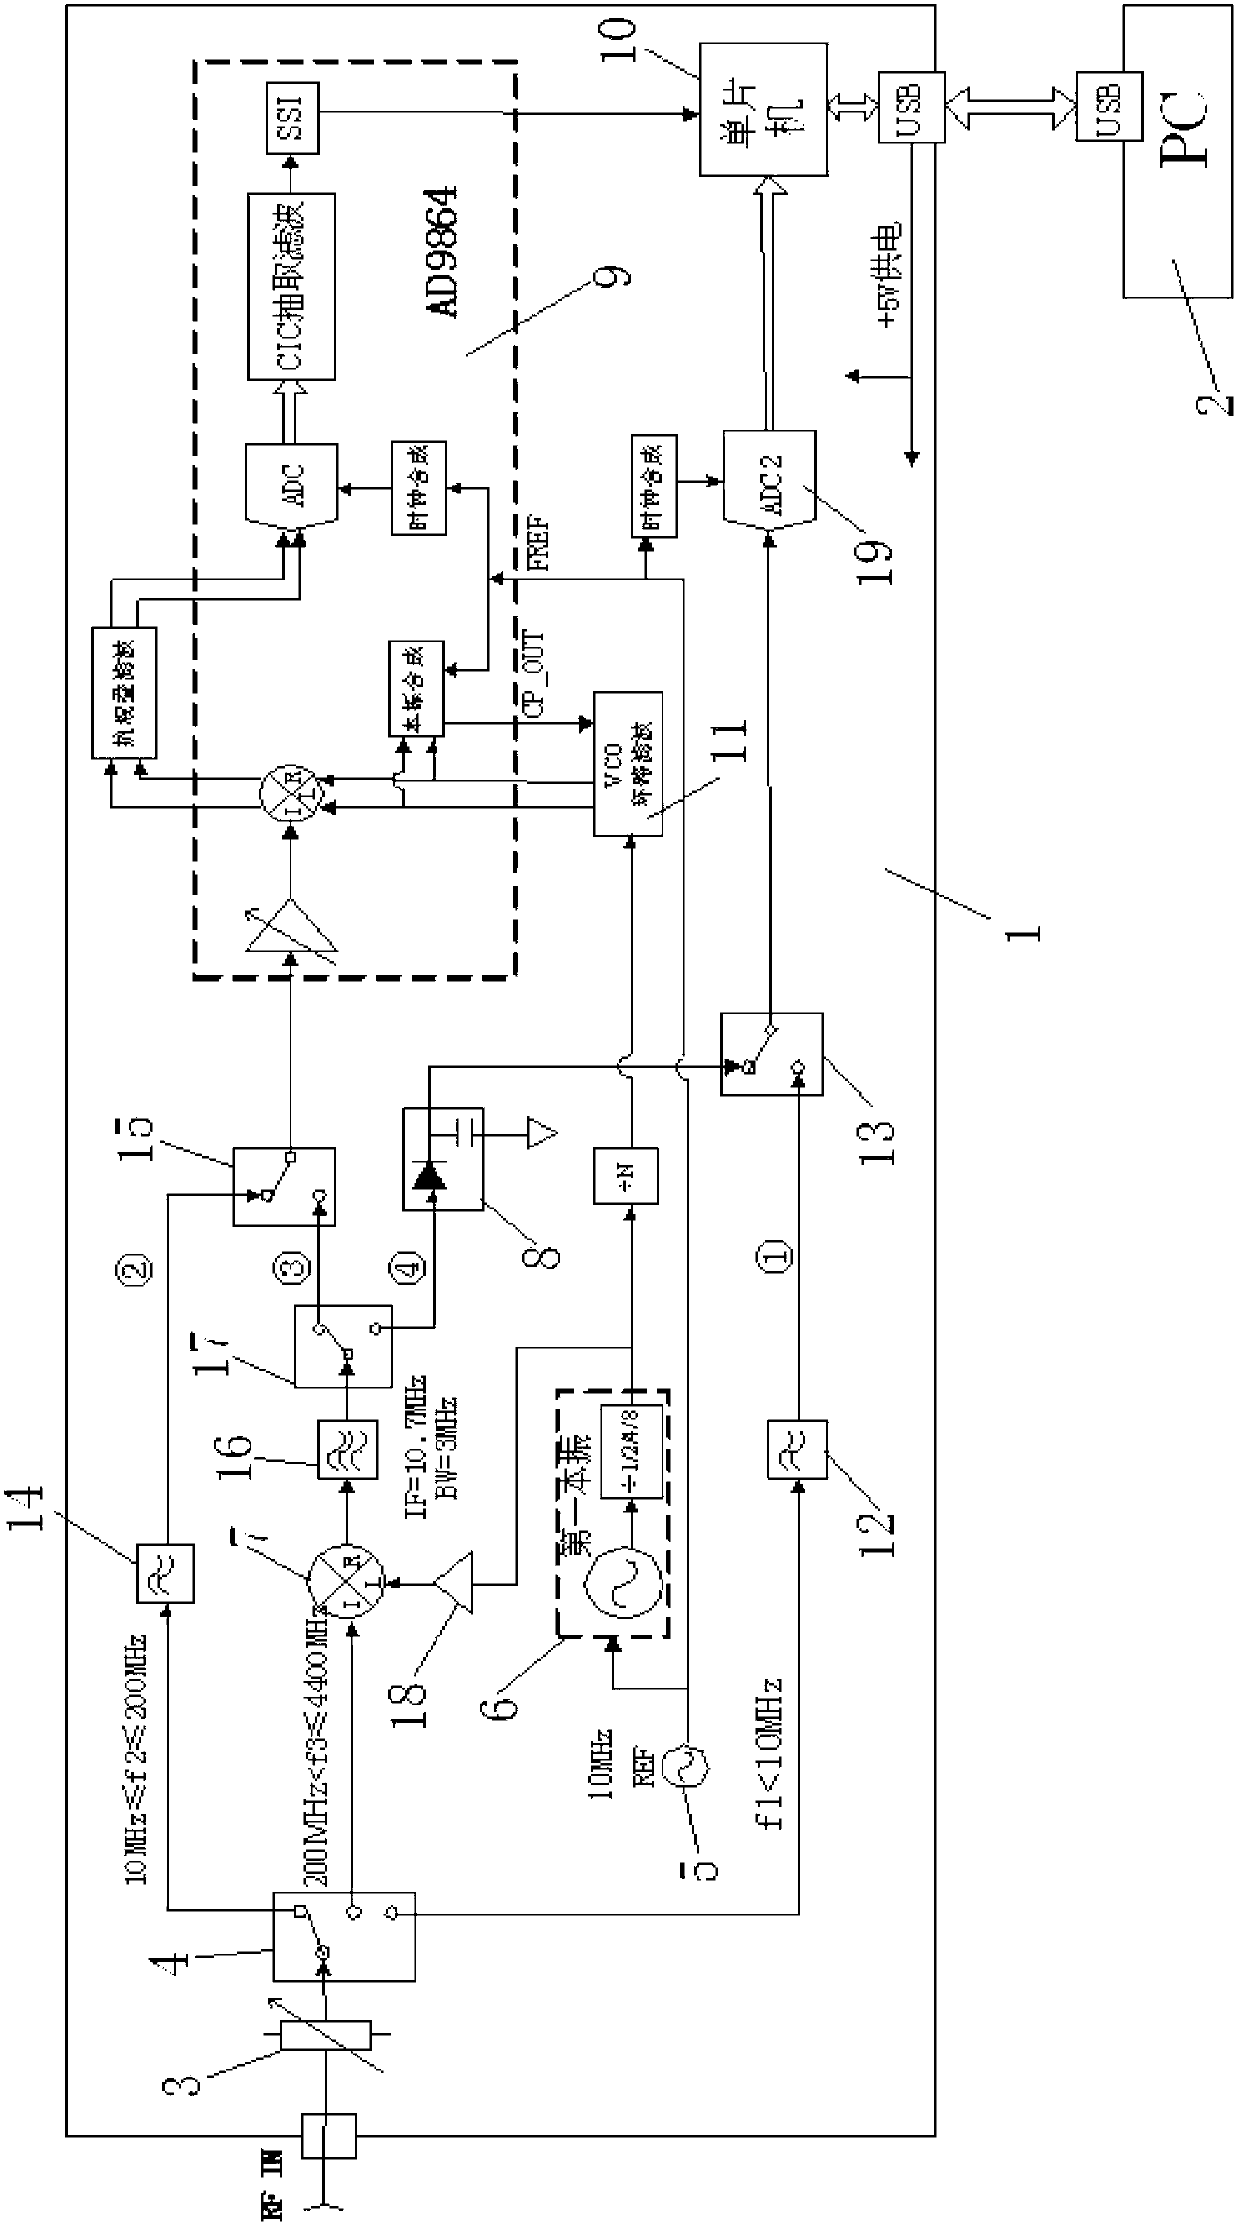 Fast Fourier transform (FFT) broadband frequency spectrometer design based on AD9864 medium frequency digitization system